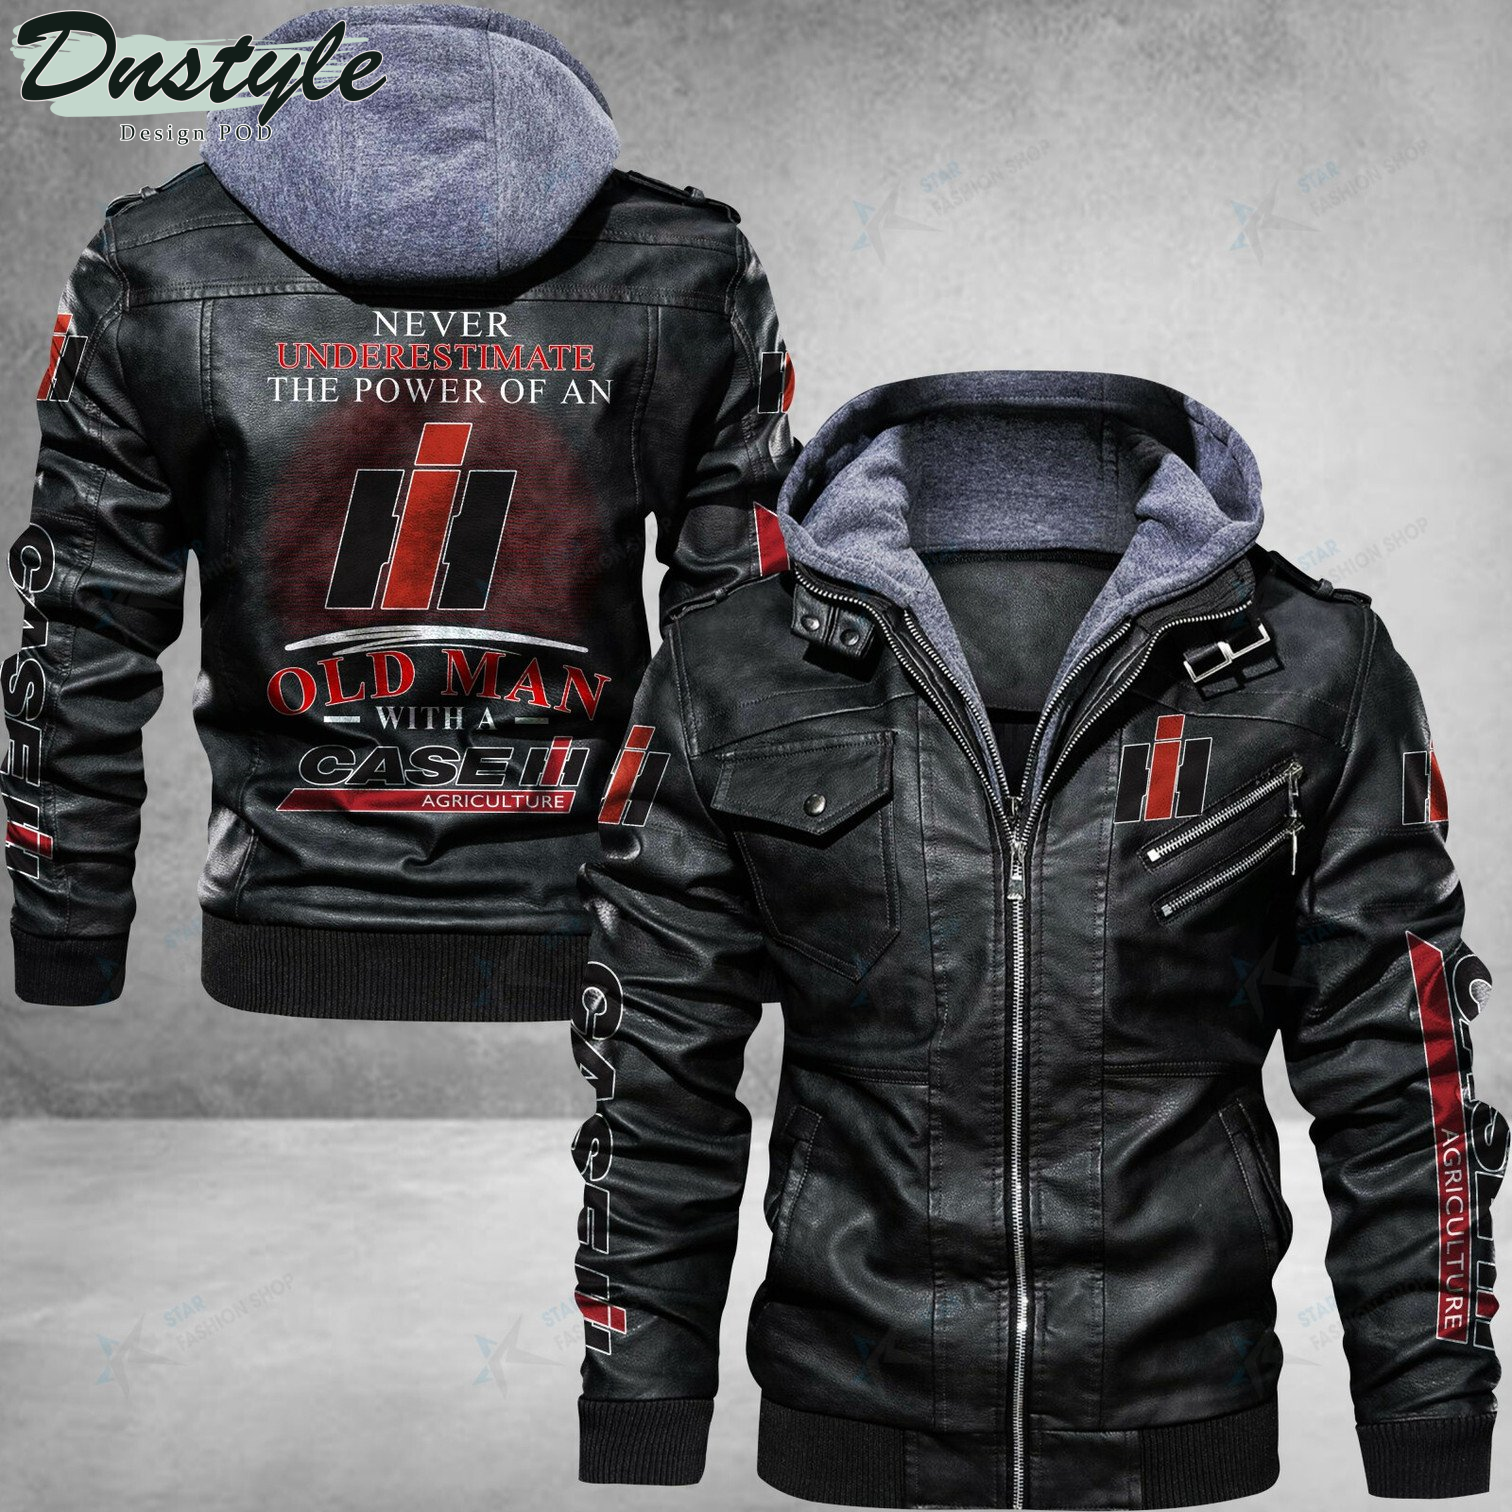 Case IH never underestimate the power of an old man leather jacket